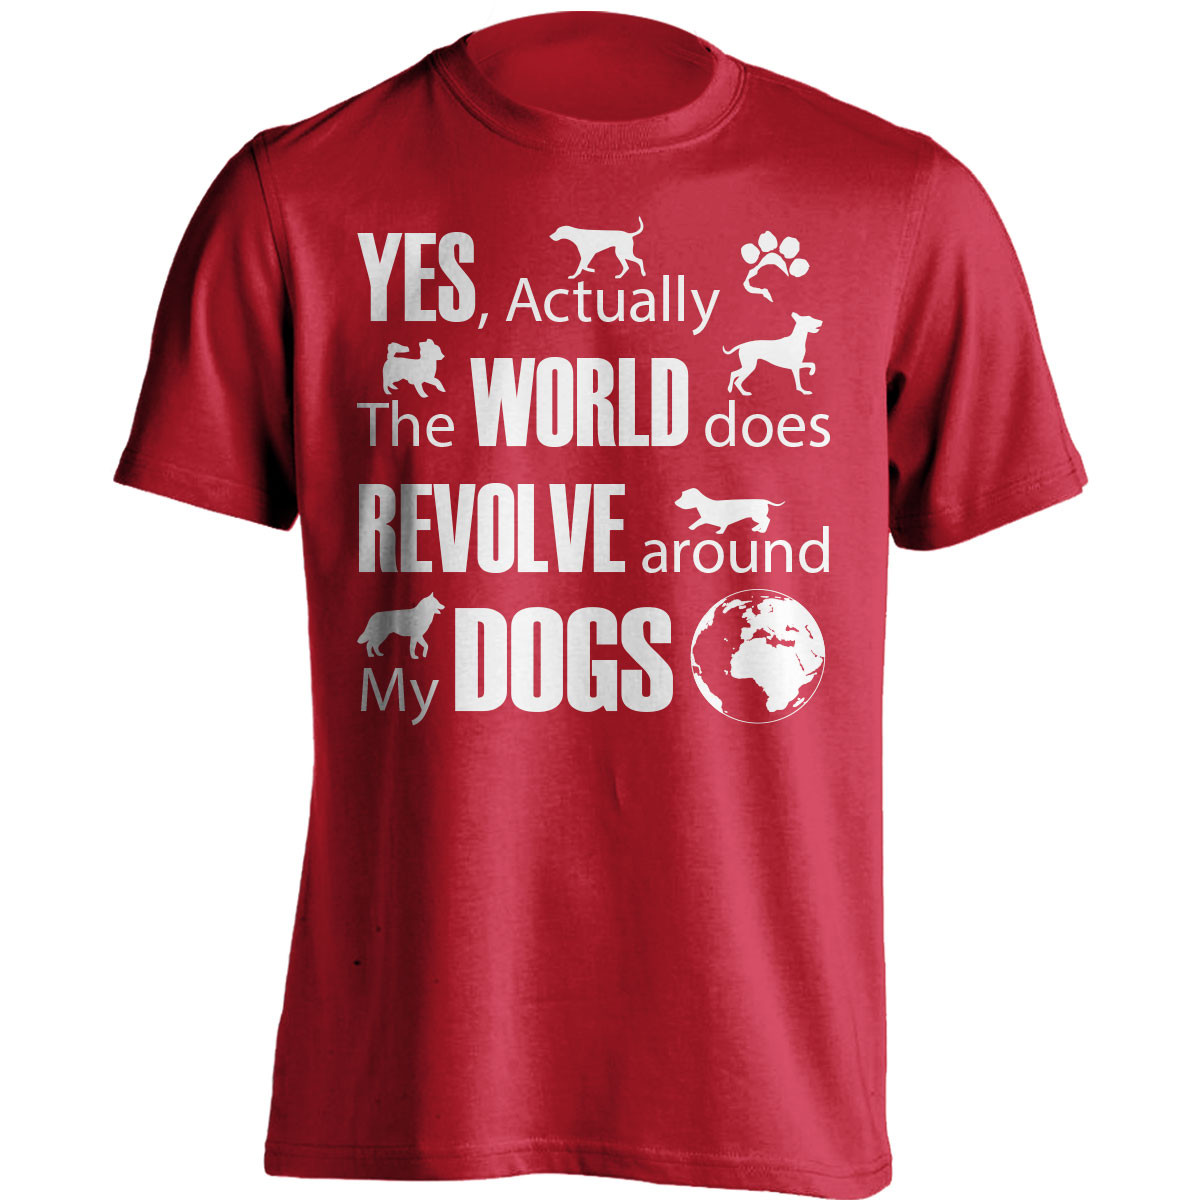 "The World Does Revolve Around My Dogs" T-Shirt